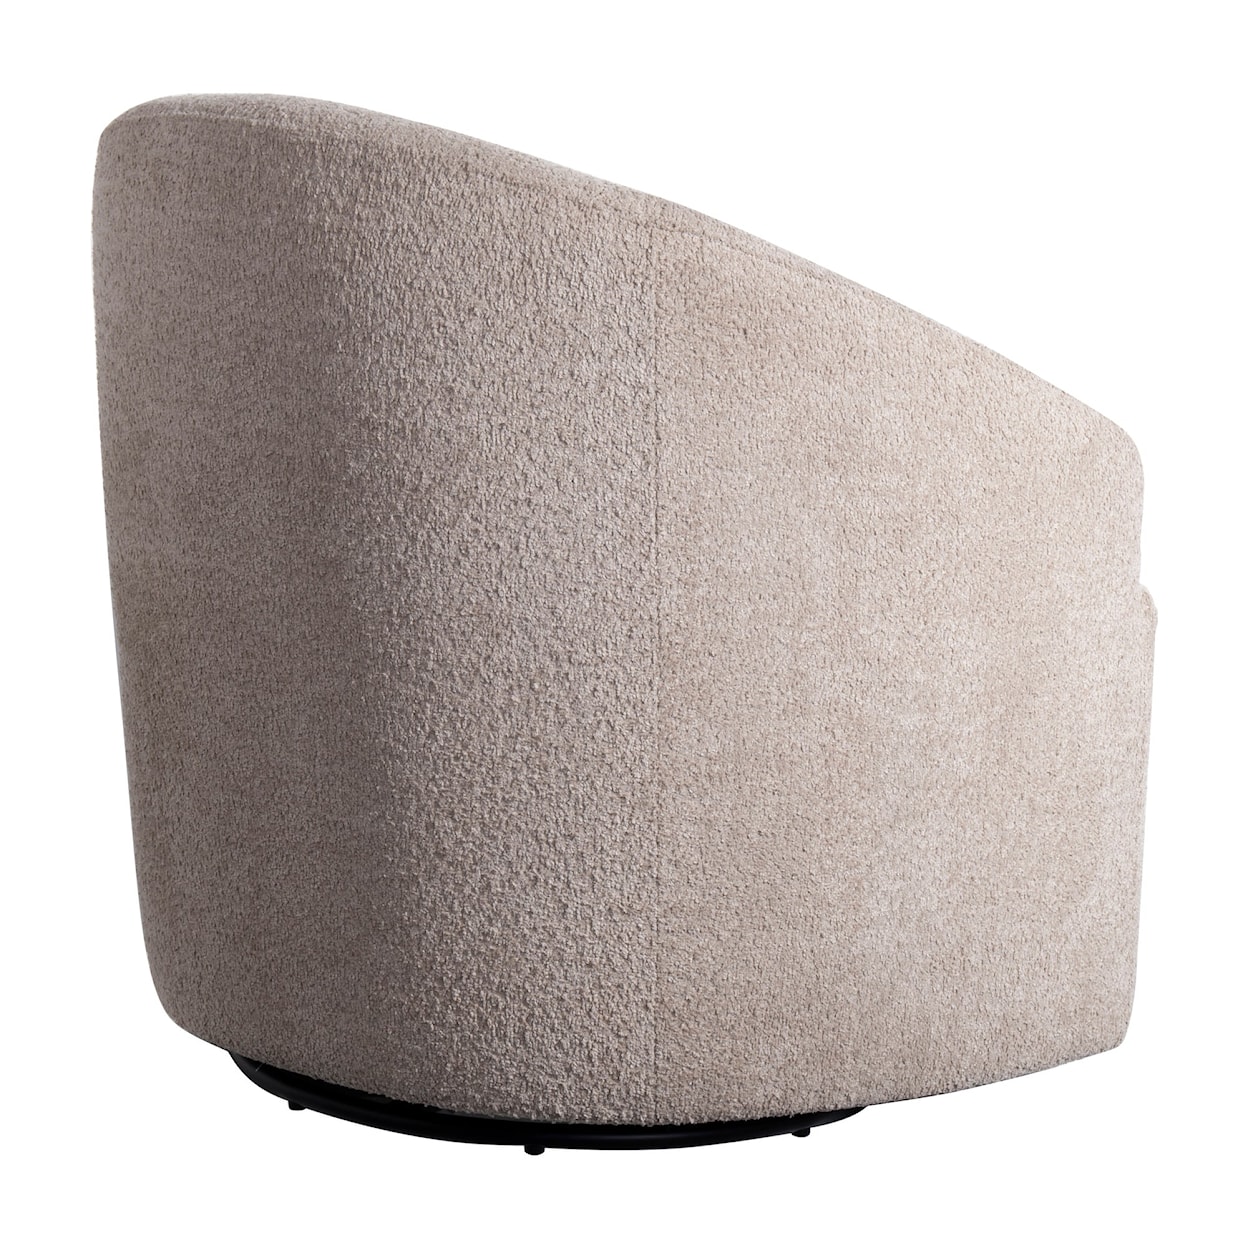 JLA Home Home Accents Swivel Chair